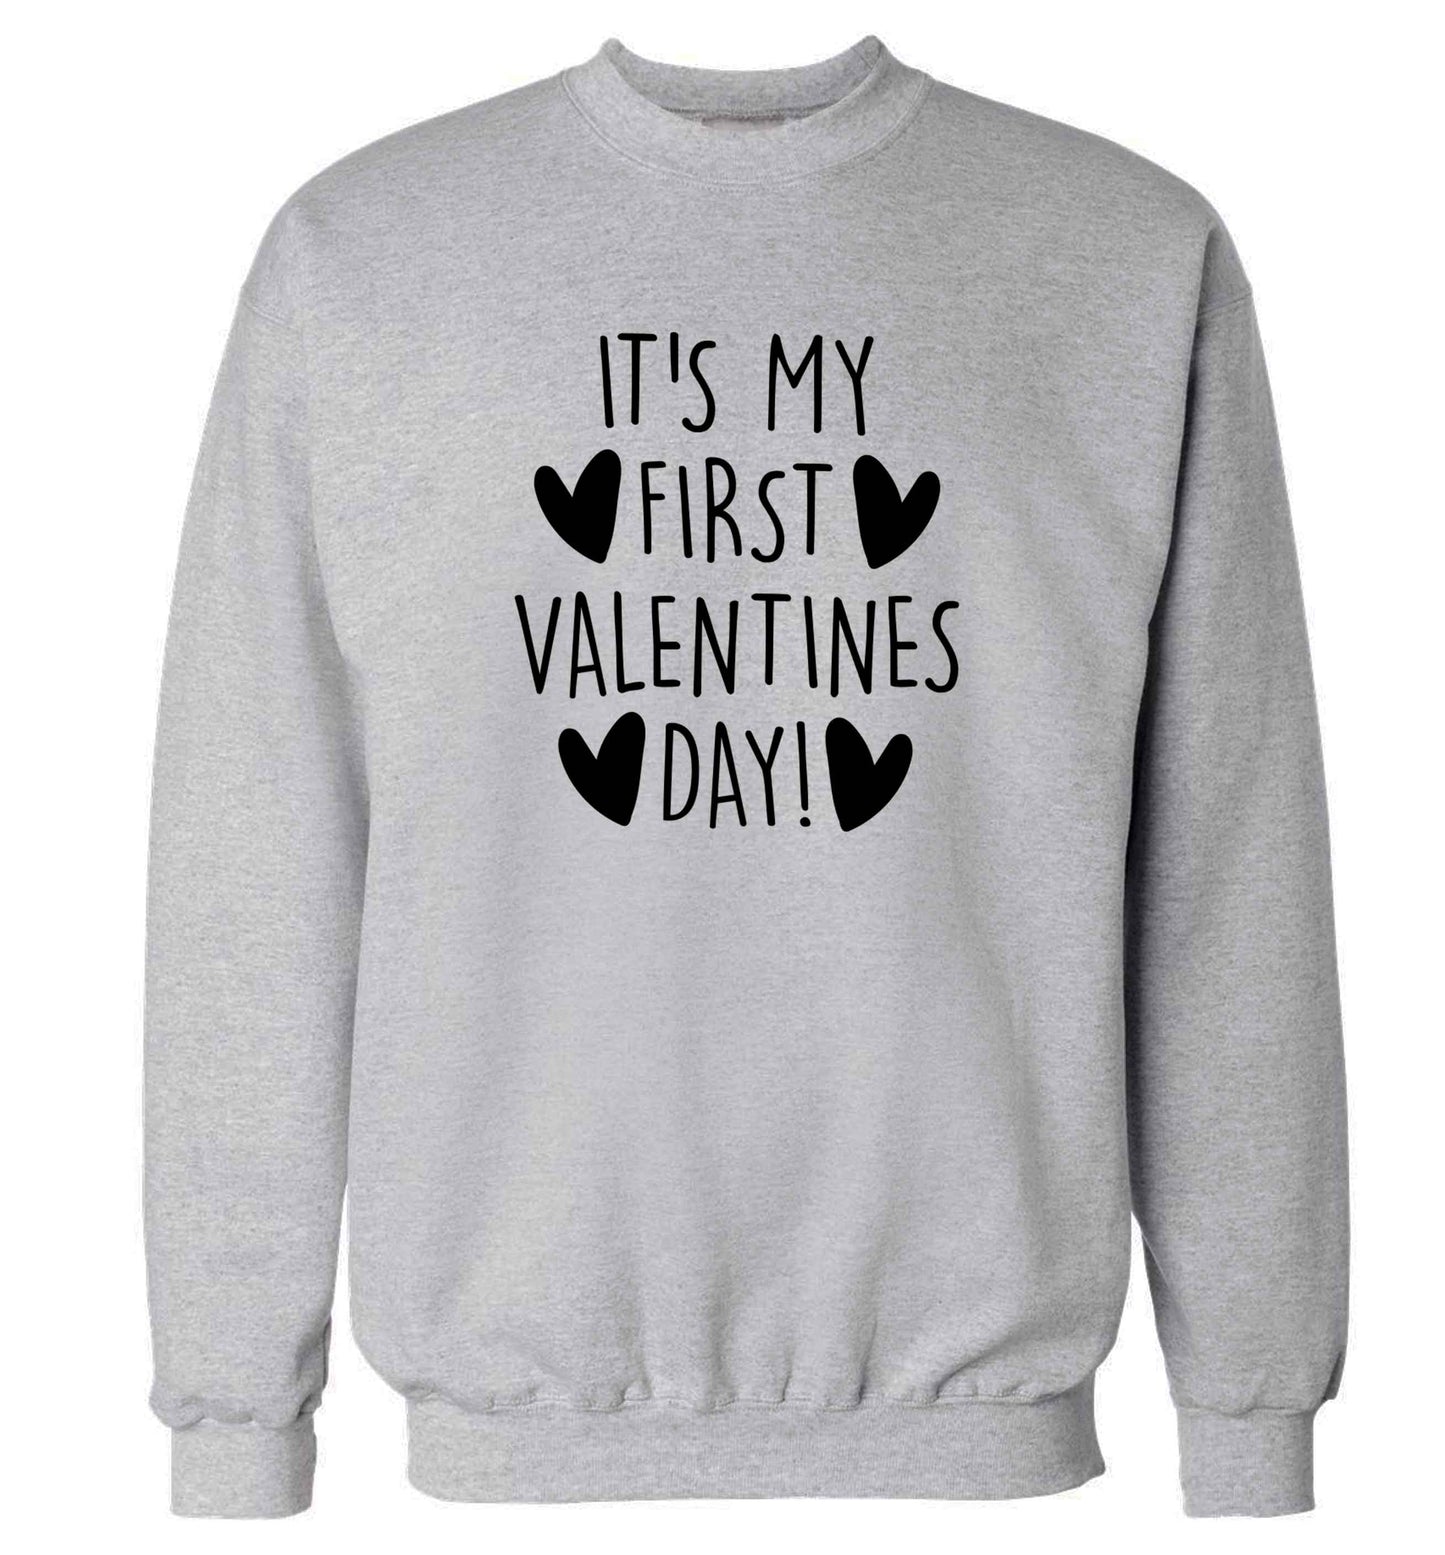 It's my first valentines day! adult's unisex grey sweater 2XL